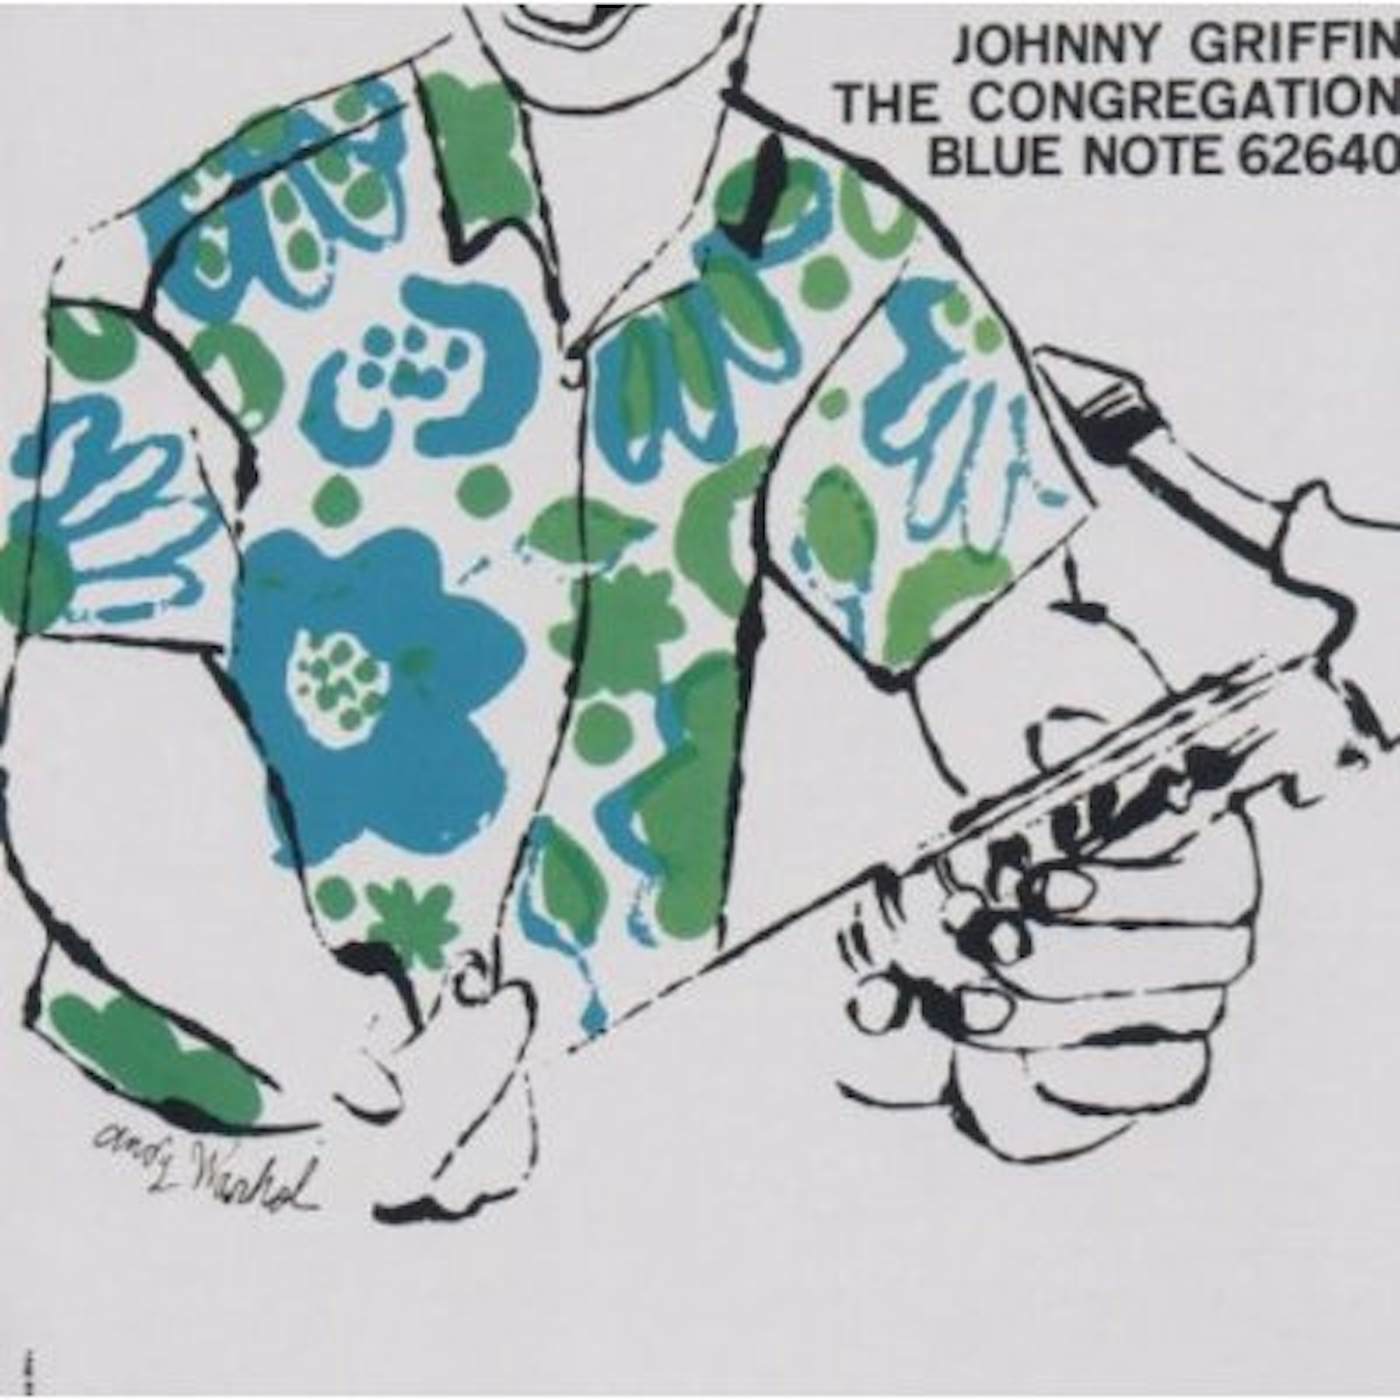 Johnny Griffin CONGREGATION CD